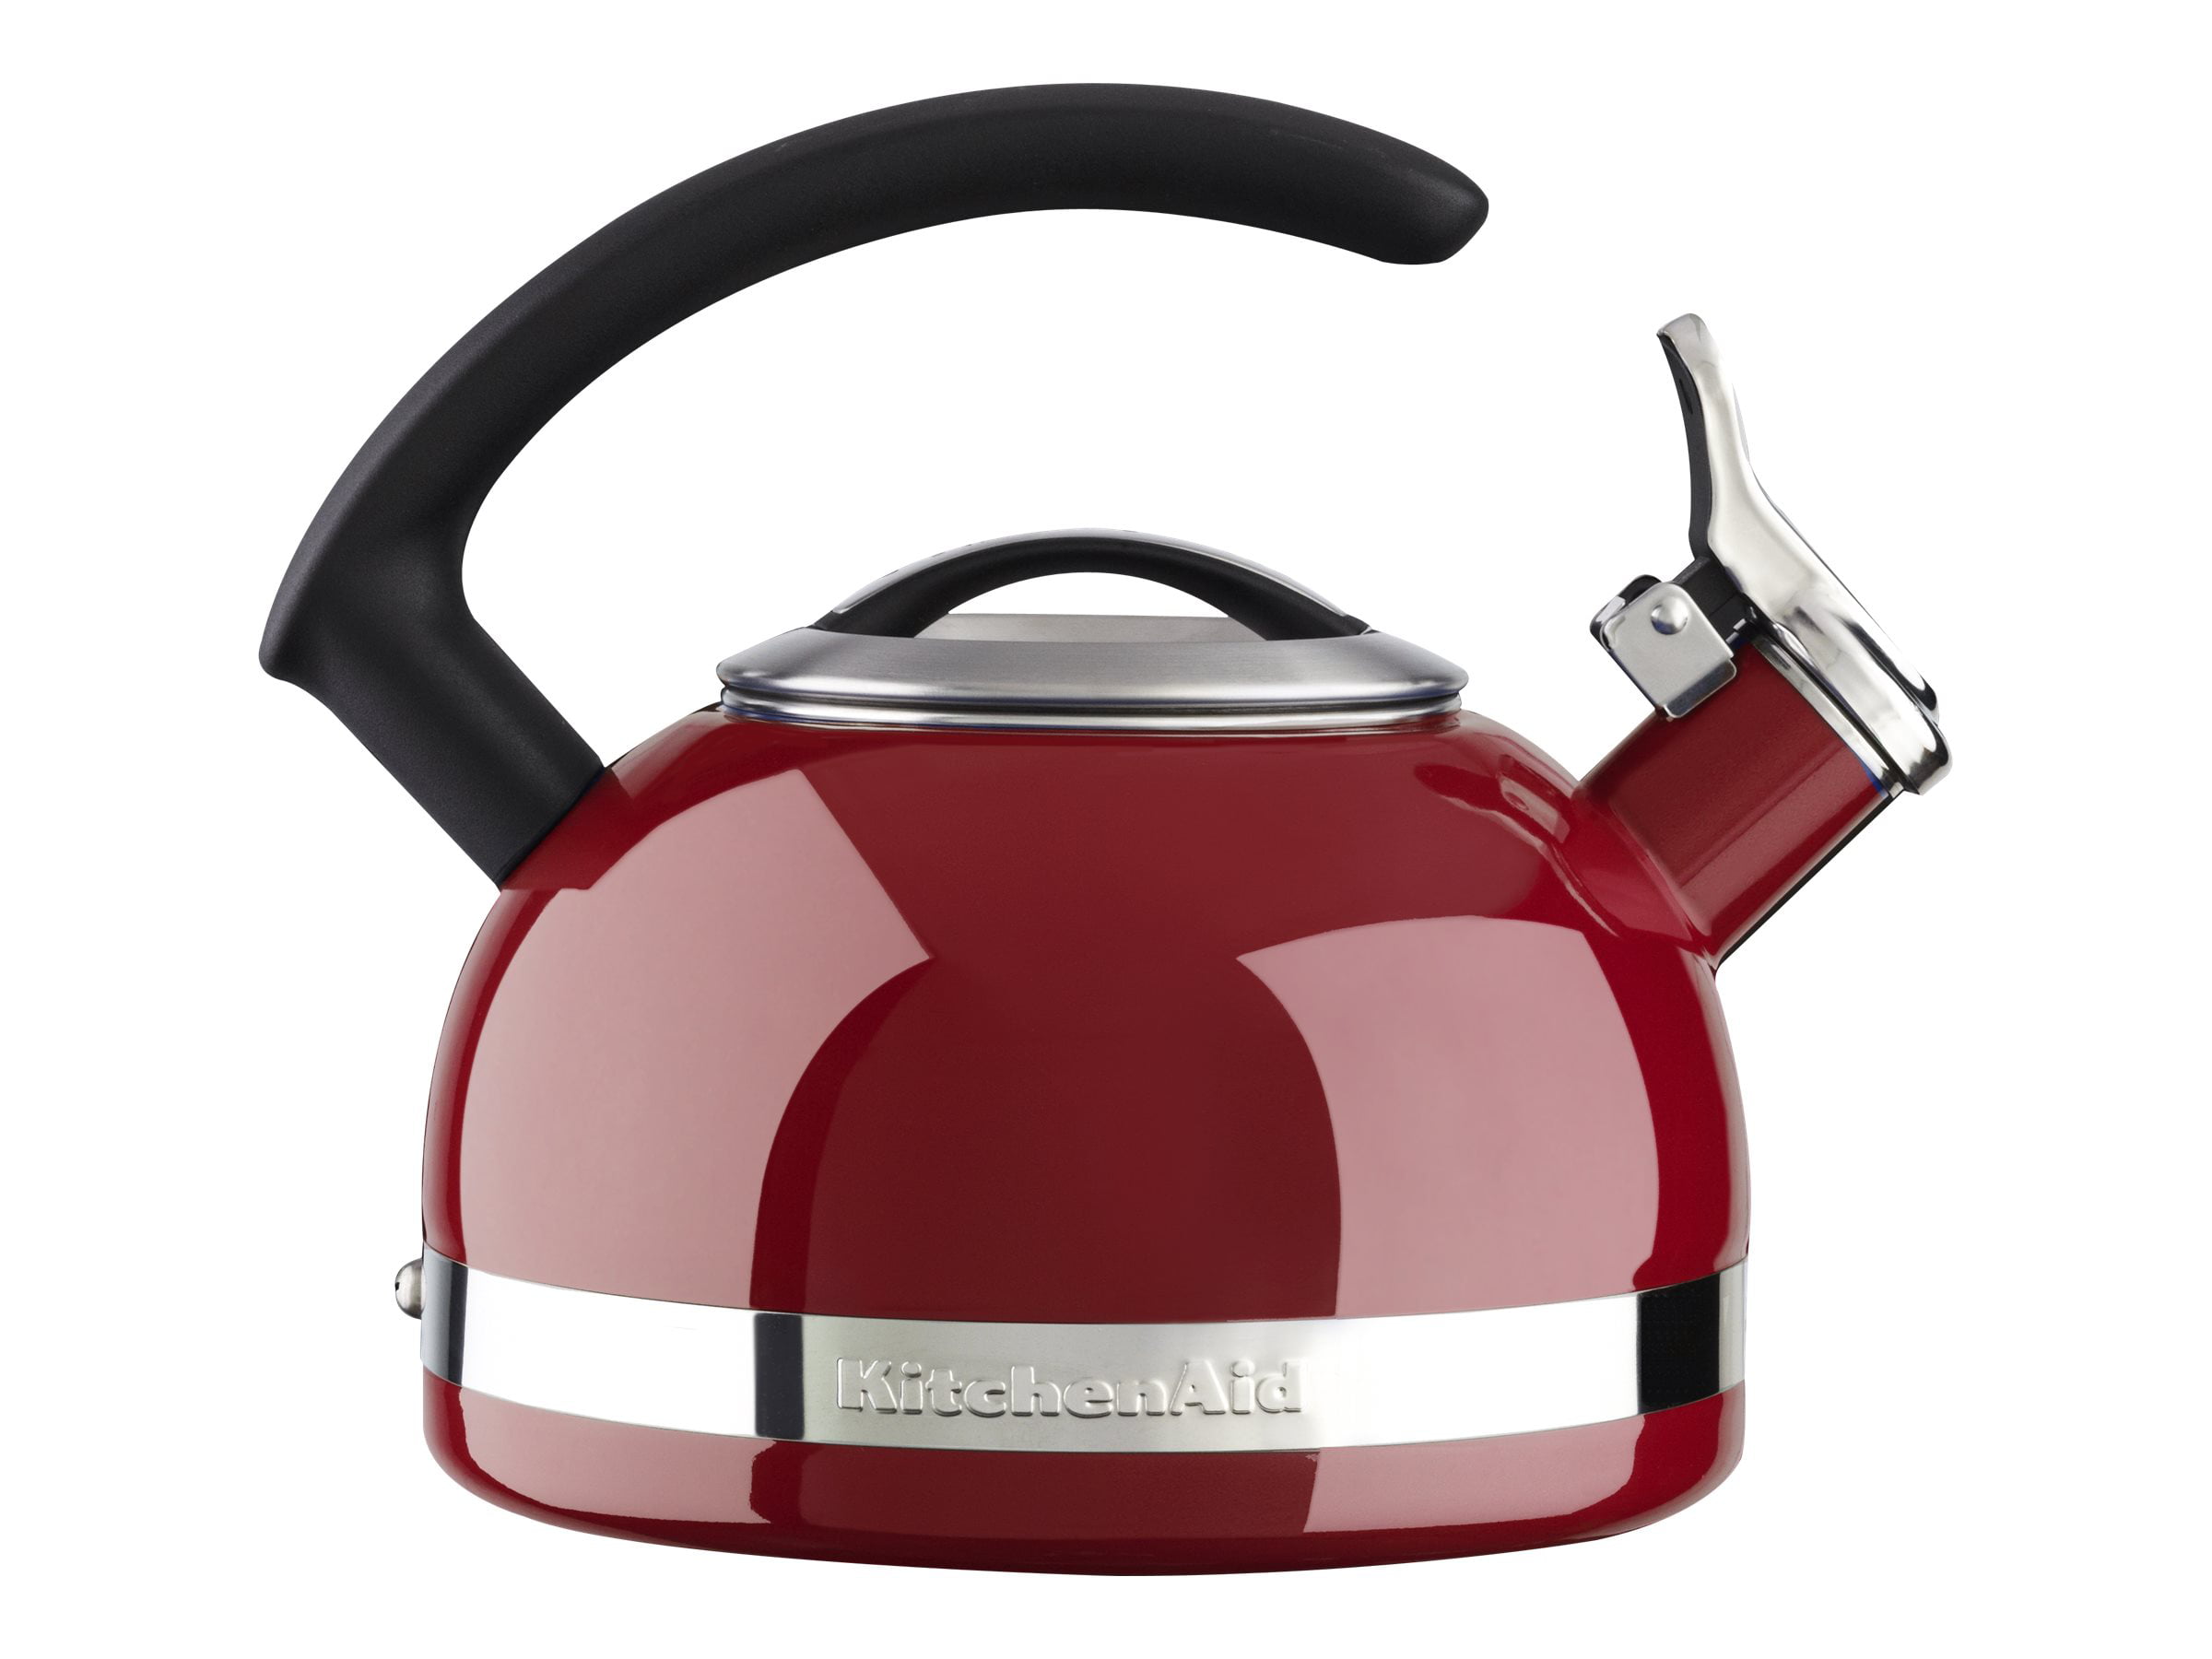 KitchenAid 2 qt. Kettle with C-Handle and Trim Band Empire Red